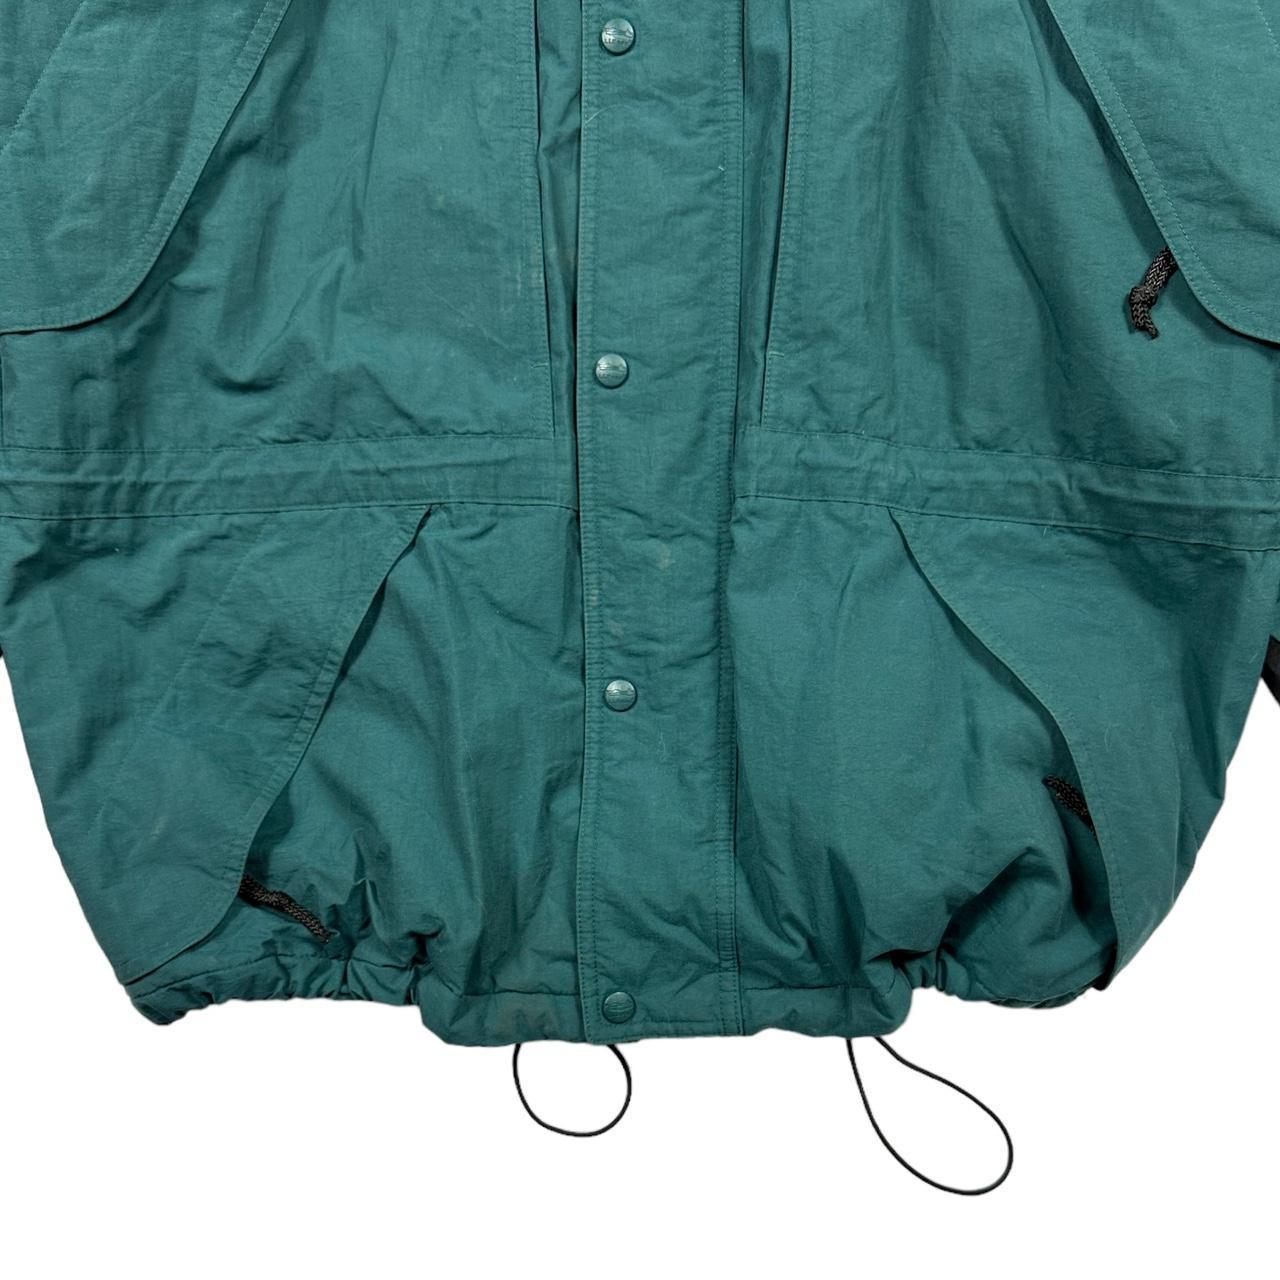 2000s L.L. Bean Green Outdoors Hooded Jacket - Known Source